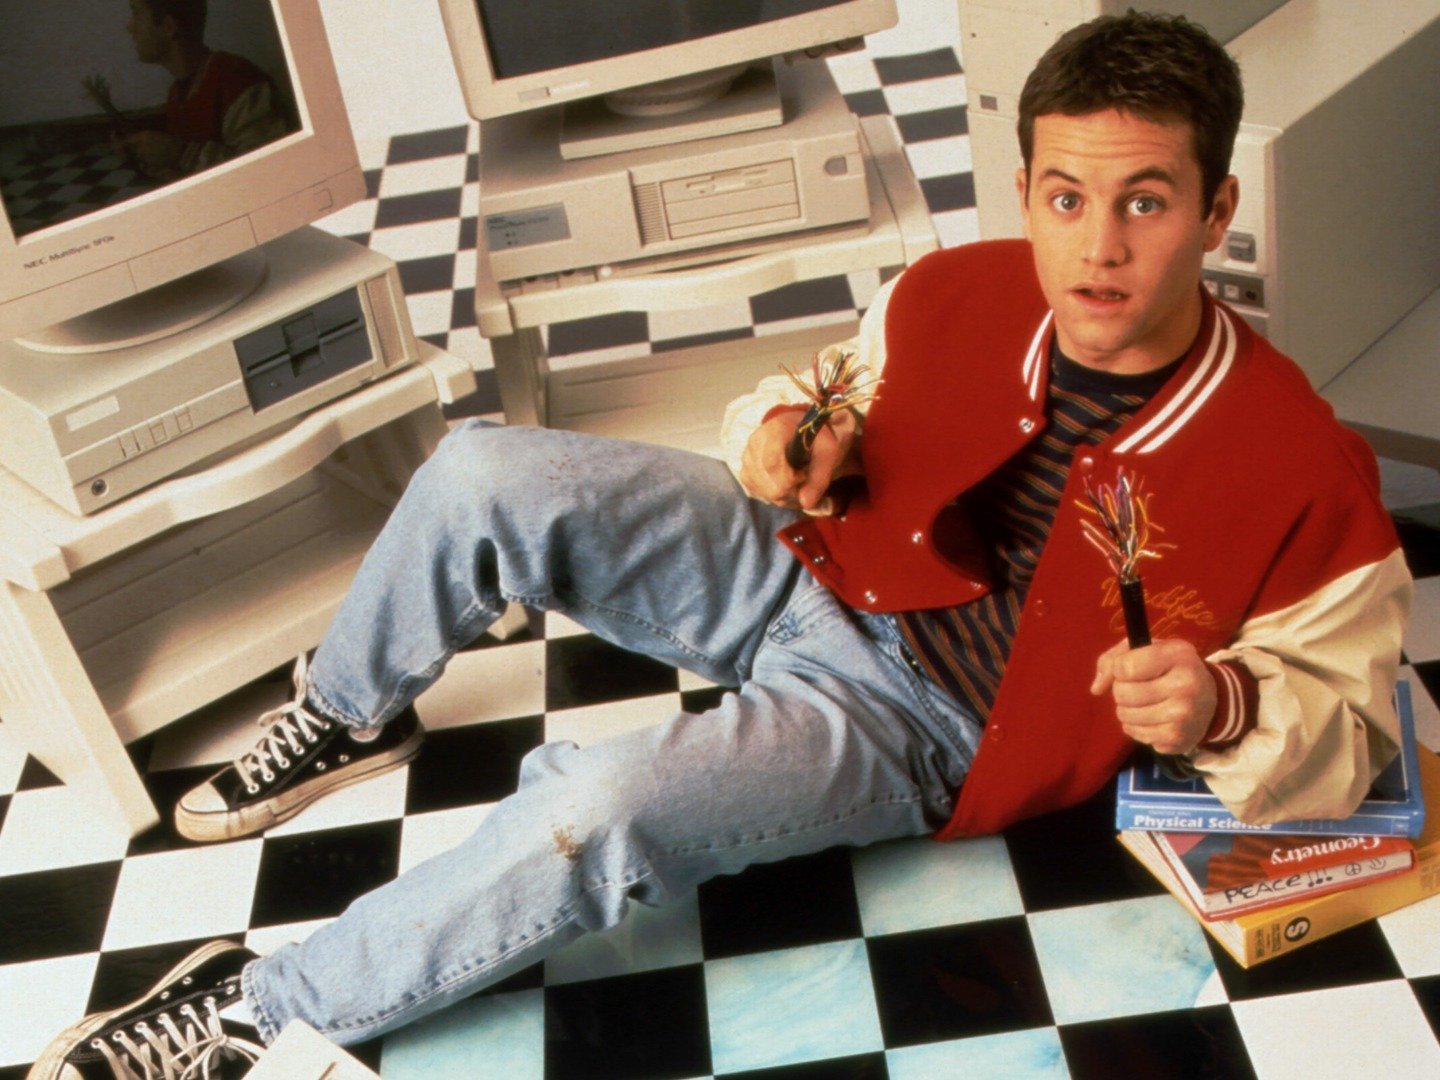 the computer wore tennis shoes kirk cameron